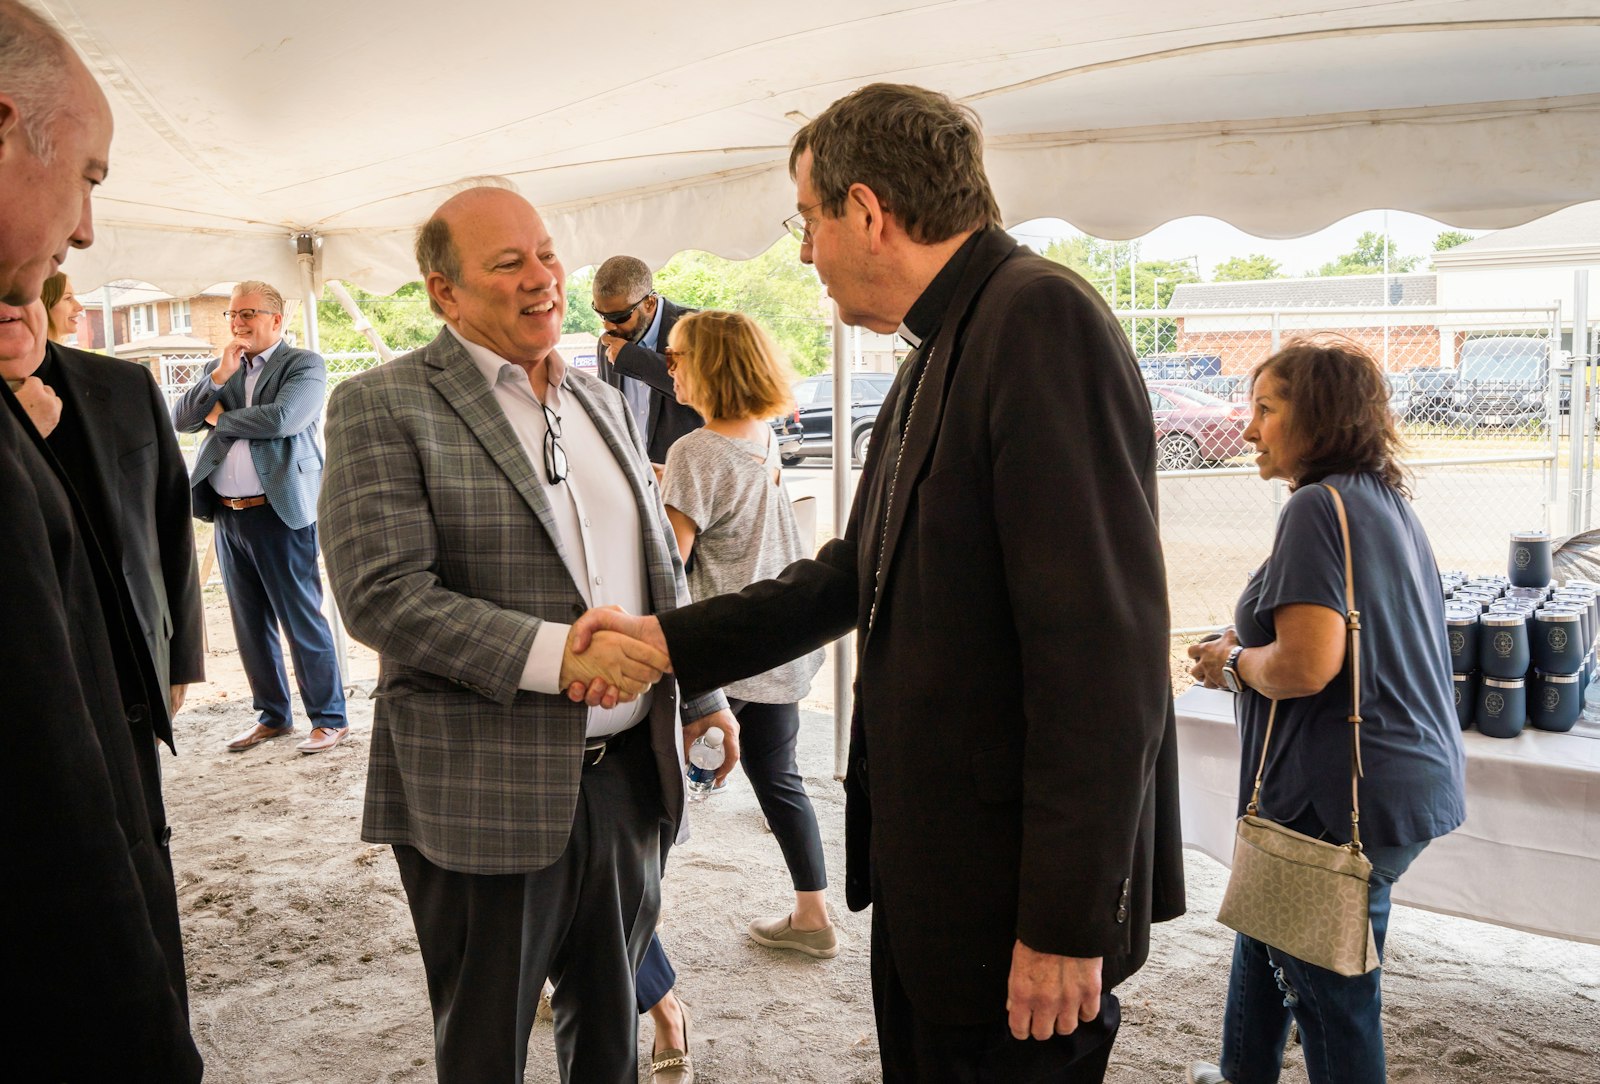 Detroit Mayor Mike Duggan shakes hands with Archbishop Allen H. Vigneron after the groundbreaking ceremony. The mayor lauded the archbishop and the Archdiocese of Detroit for its commitment to the city, which has made strides in recent years to bring affordable dwellings to the city's downtown, Midtown and neighborhoods.